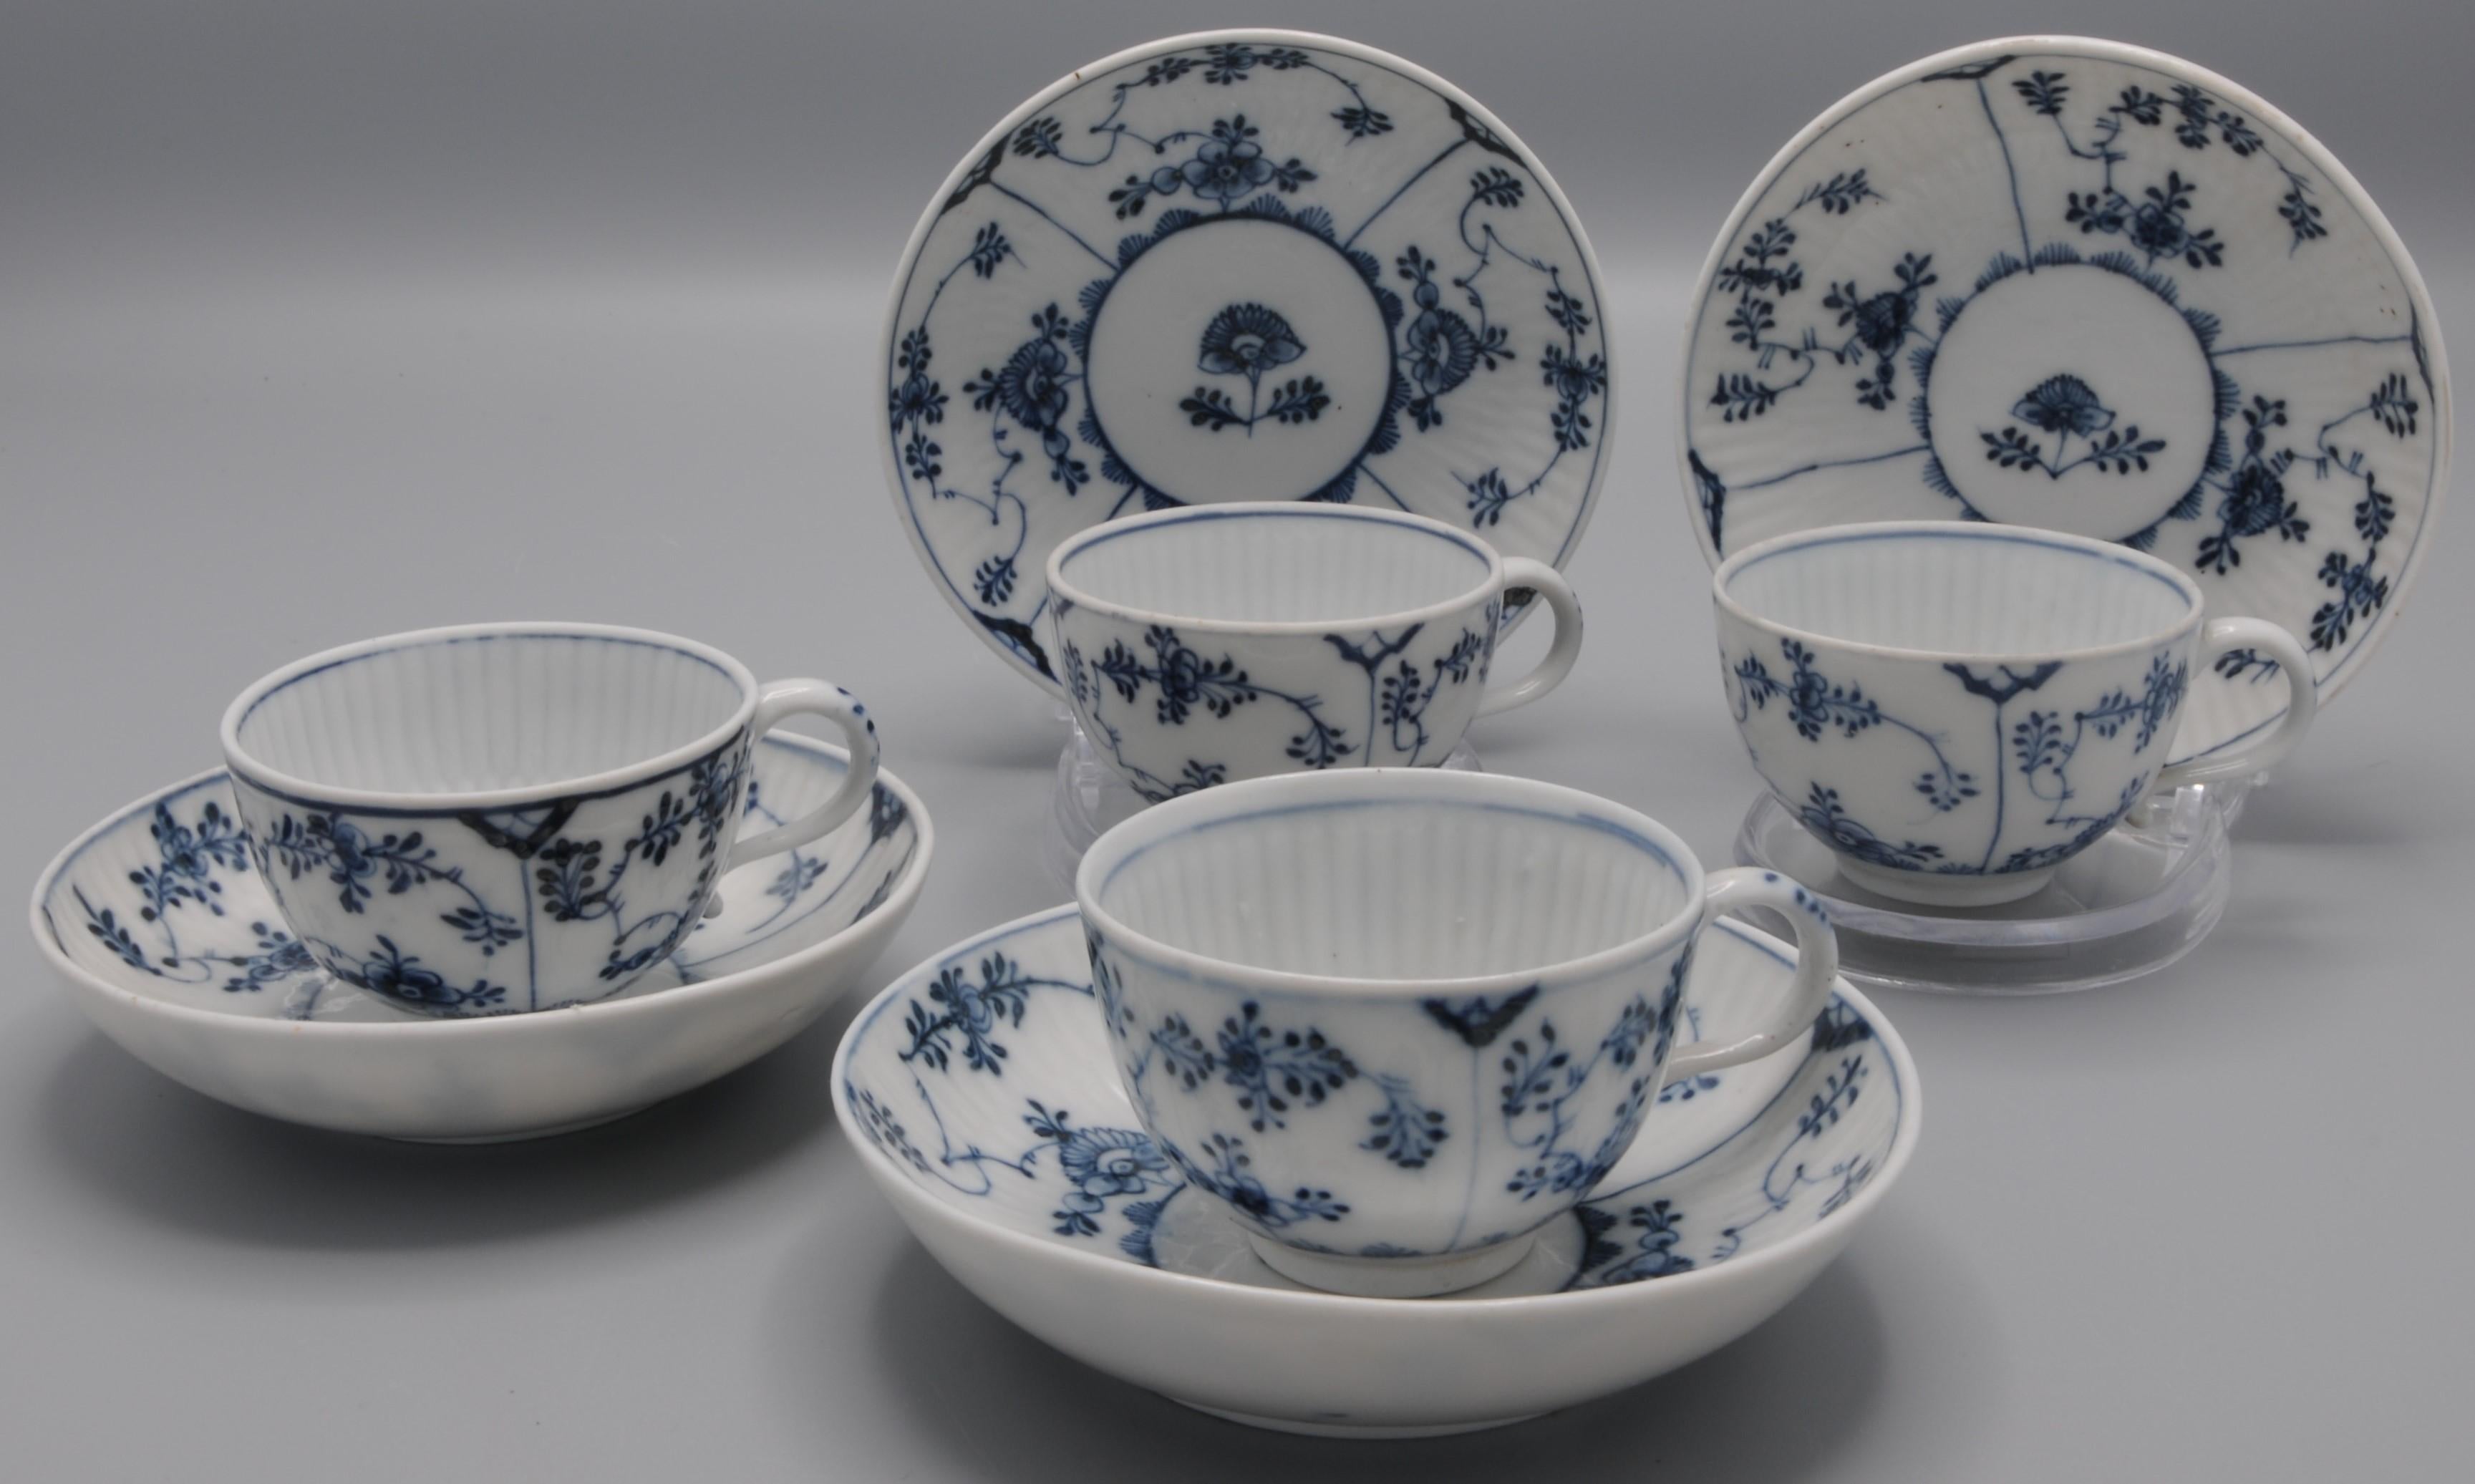 Meissen - 4 cups and saucers 'Strohblumenmuster', Marcolini period 1774-1814 For Sale 1